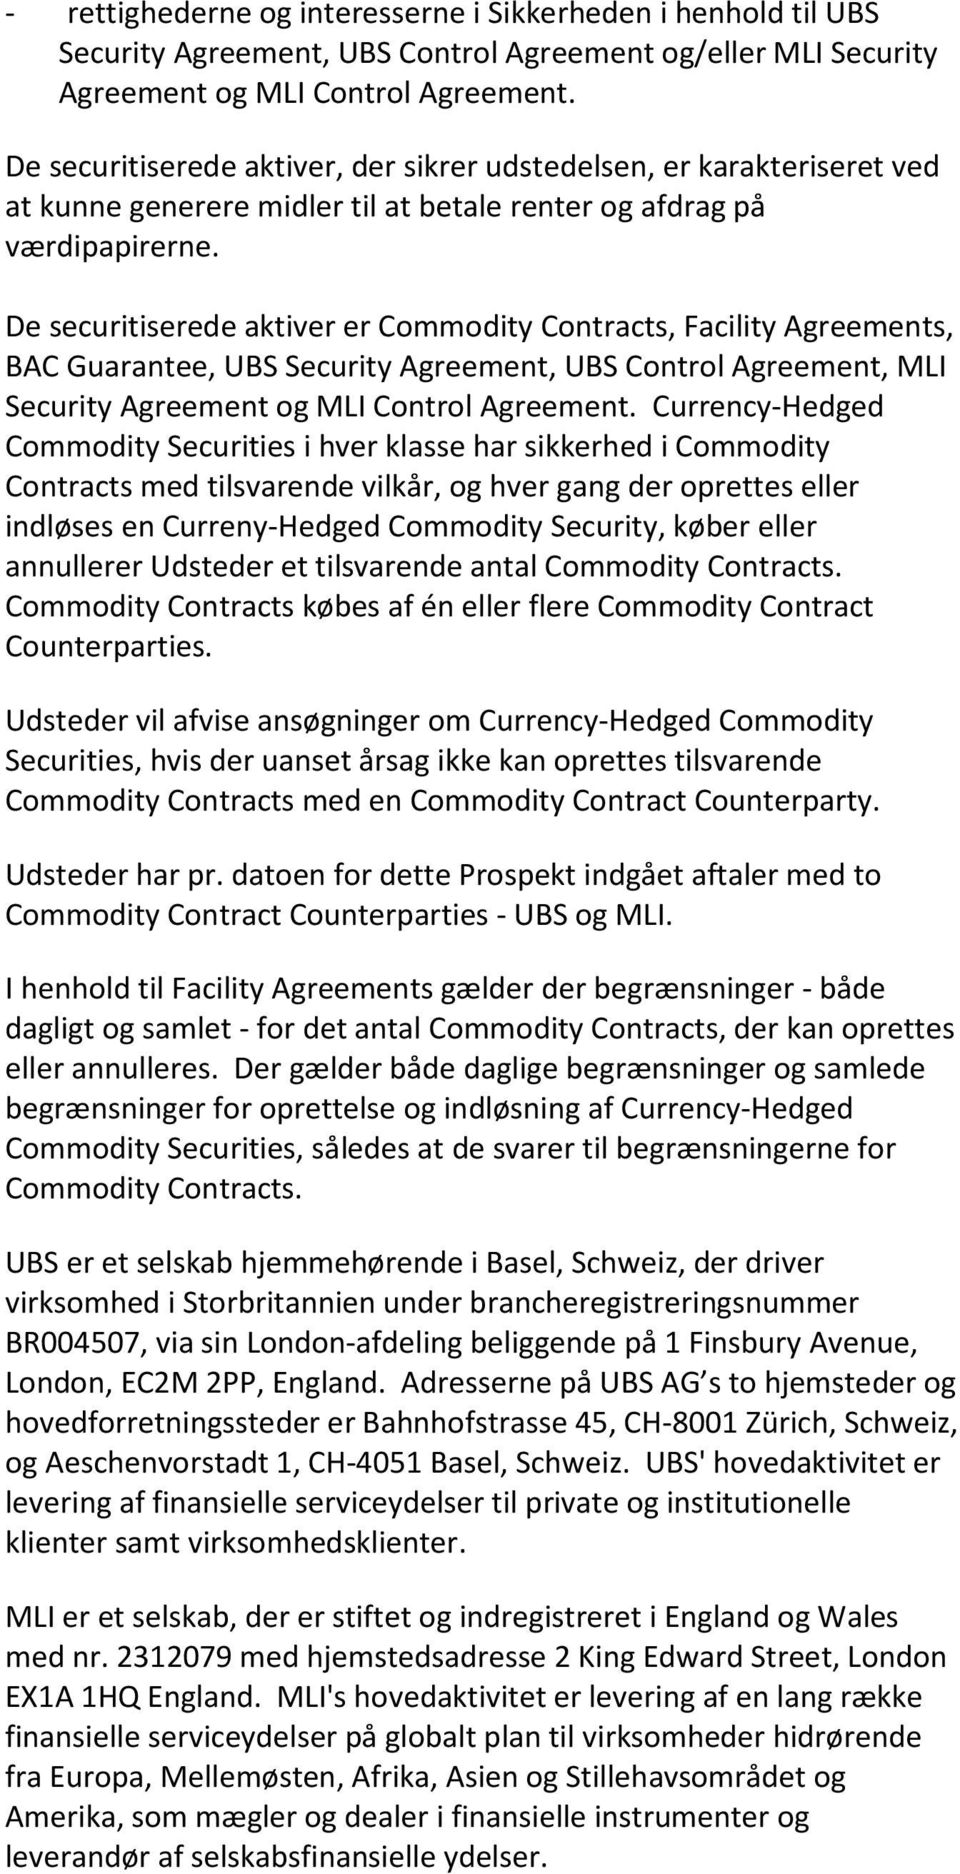 De securitiserede aktiver er Commodity Contracts, Facility Agreements, BAC Guarantee, UBS Security Agreement, UBS Control Agreement, MLI Security Agreement og MLI Control Agreement.